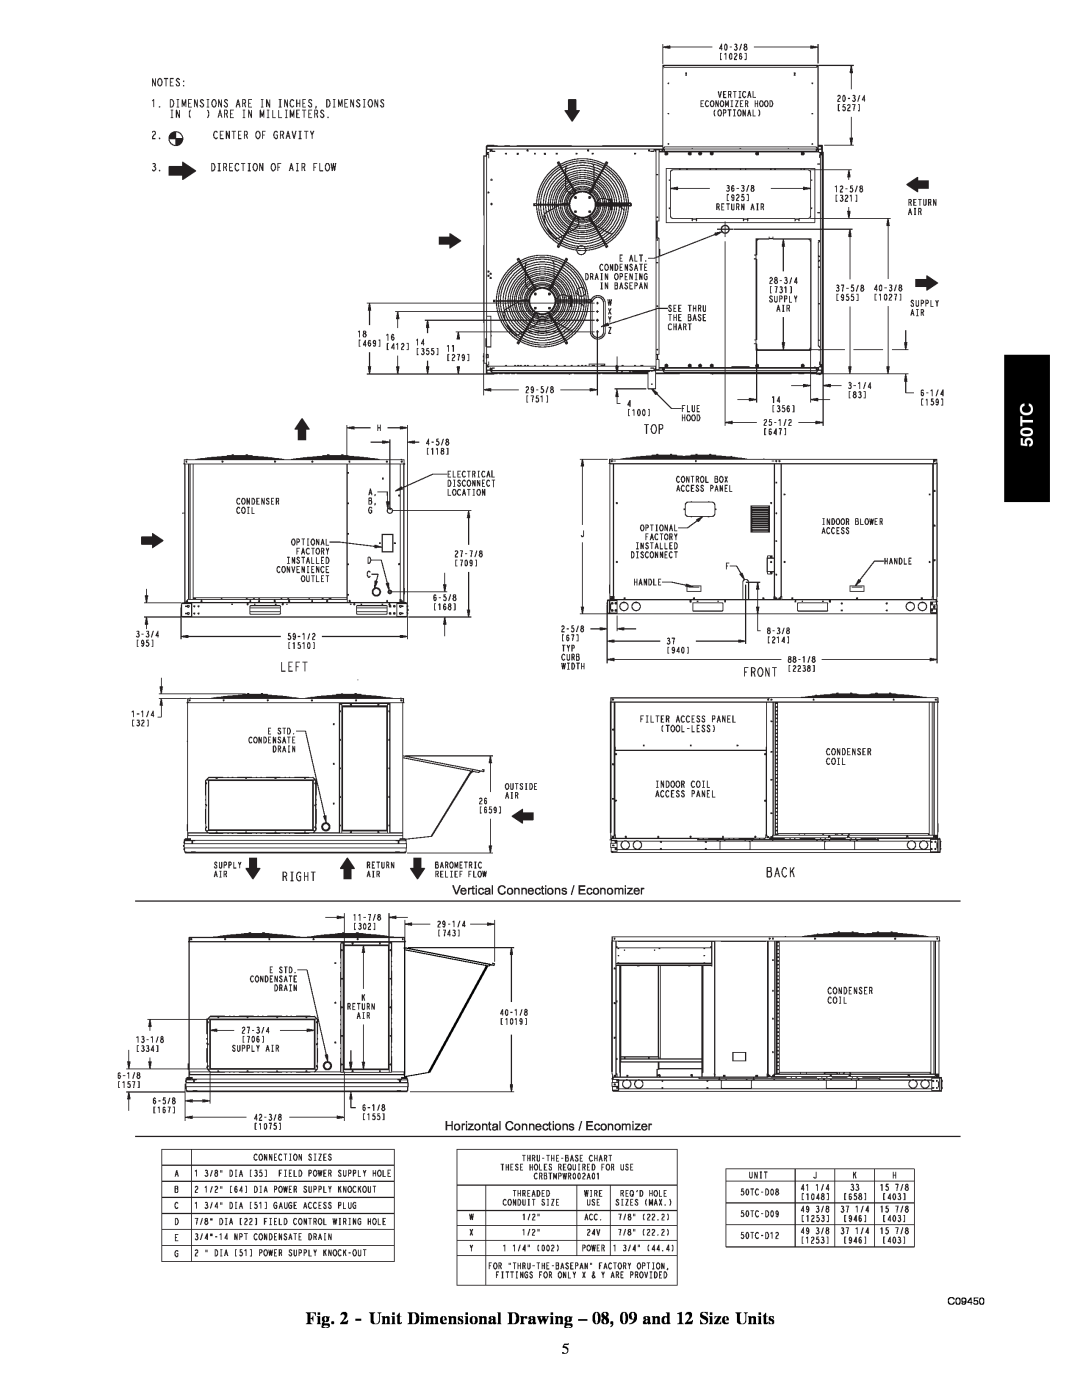 Carrier 50TC installation instructions Vertical Connections / Economizer, Horizontal Connections / Economizer, C09450 